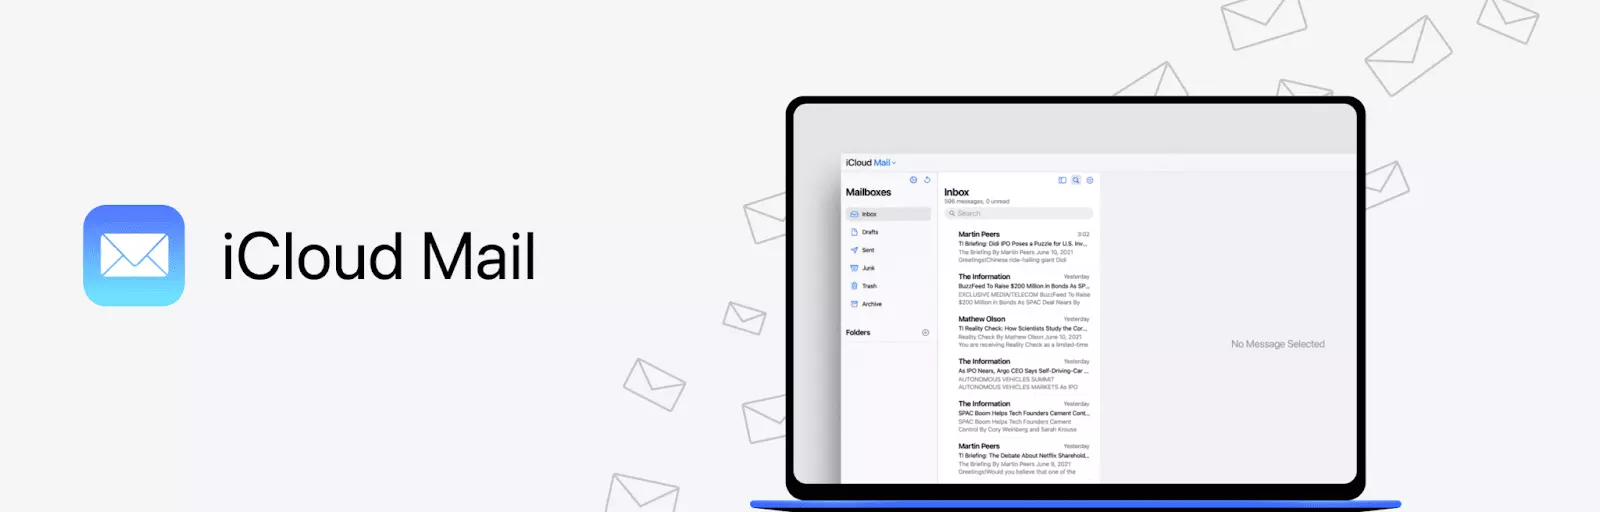 The icloud mail app is shown on a phone.